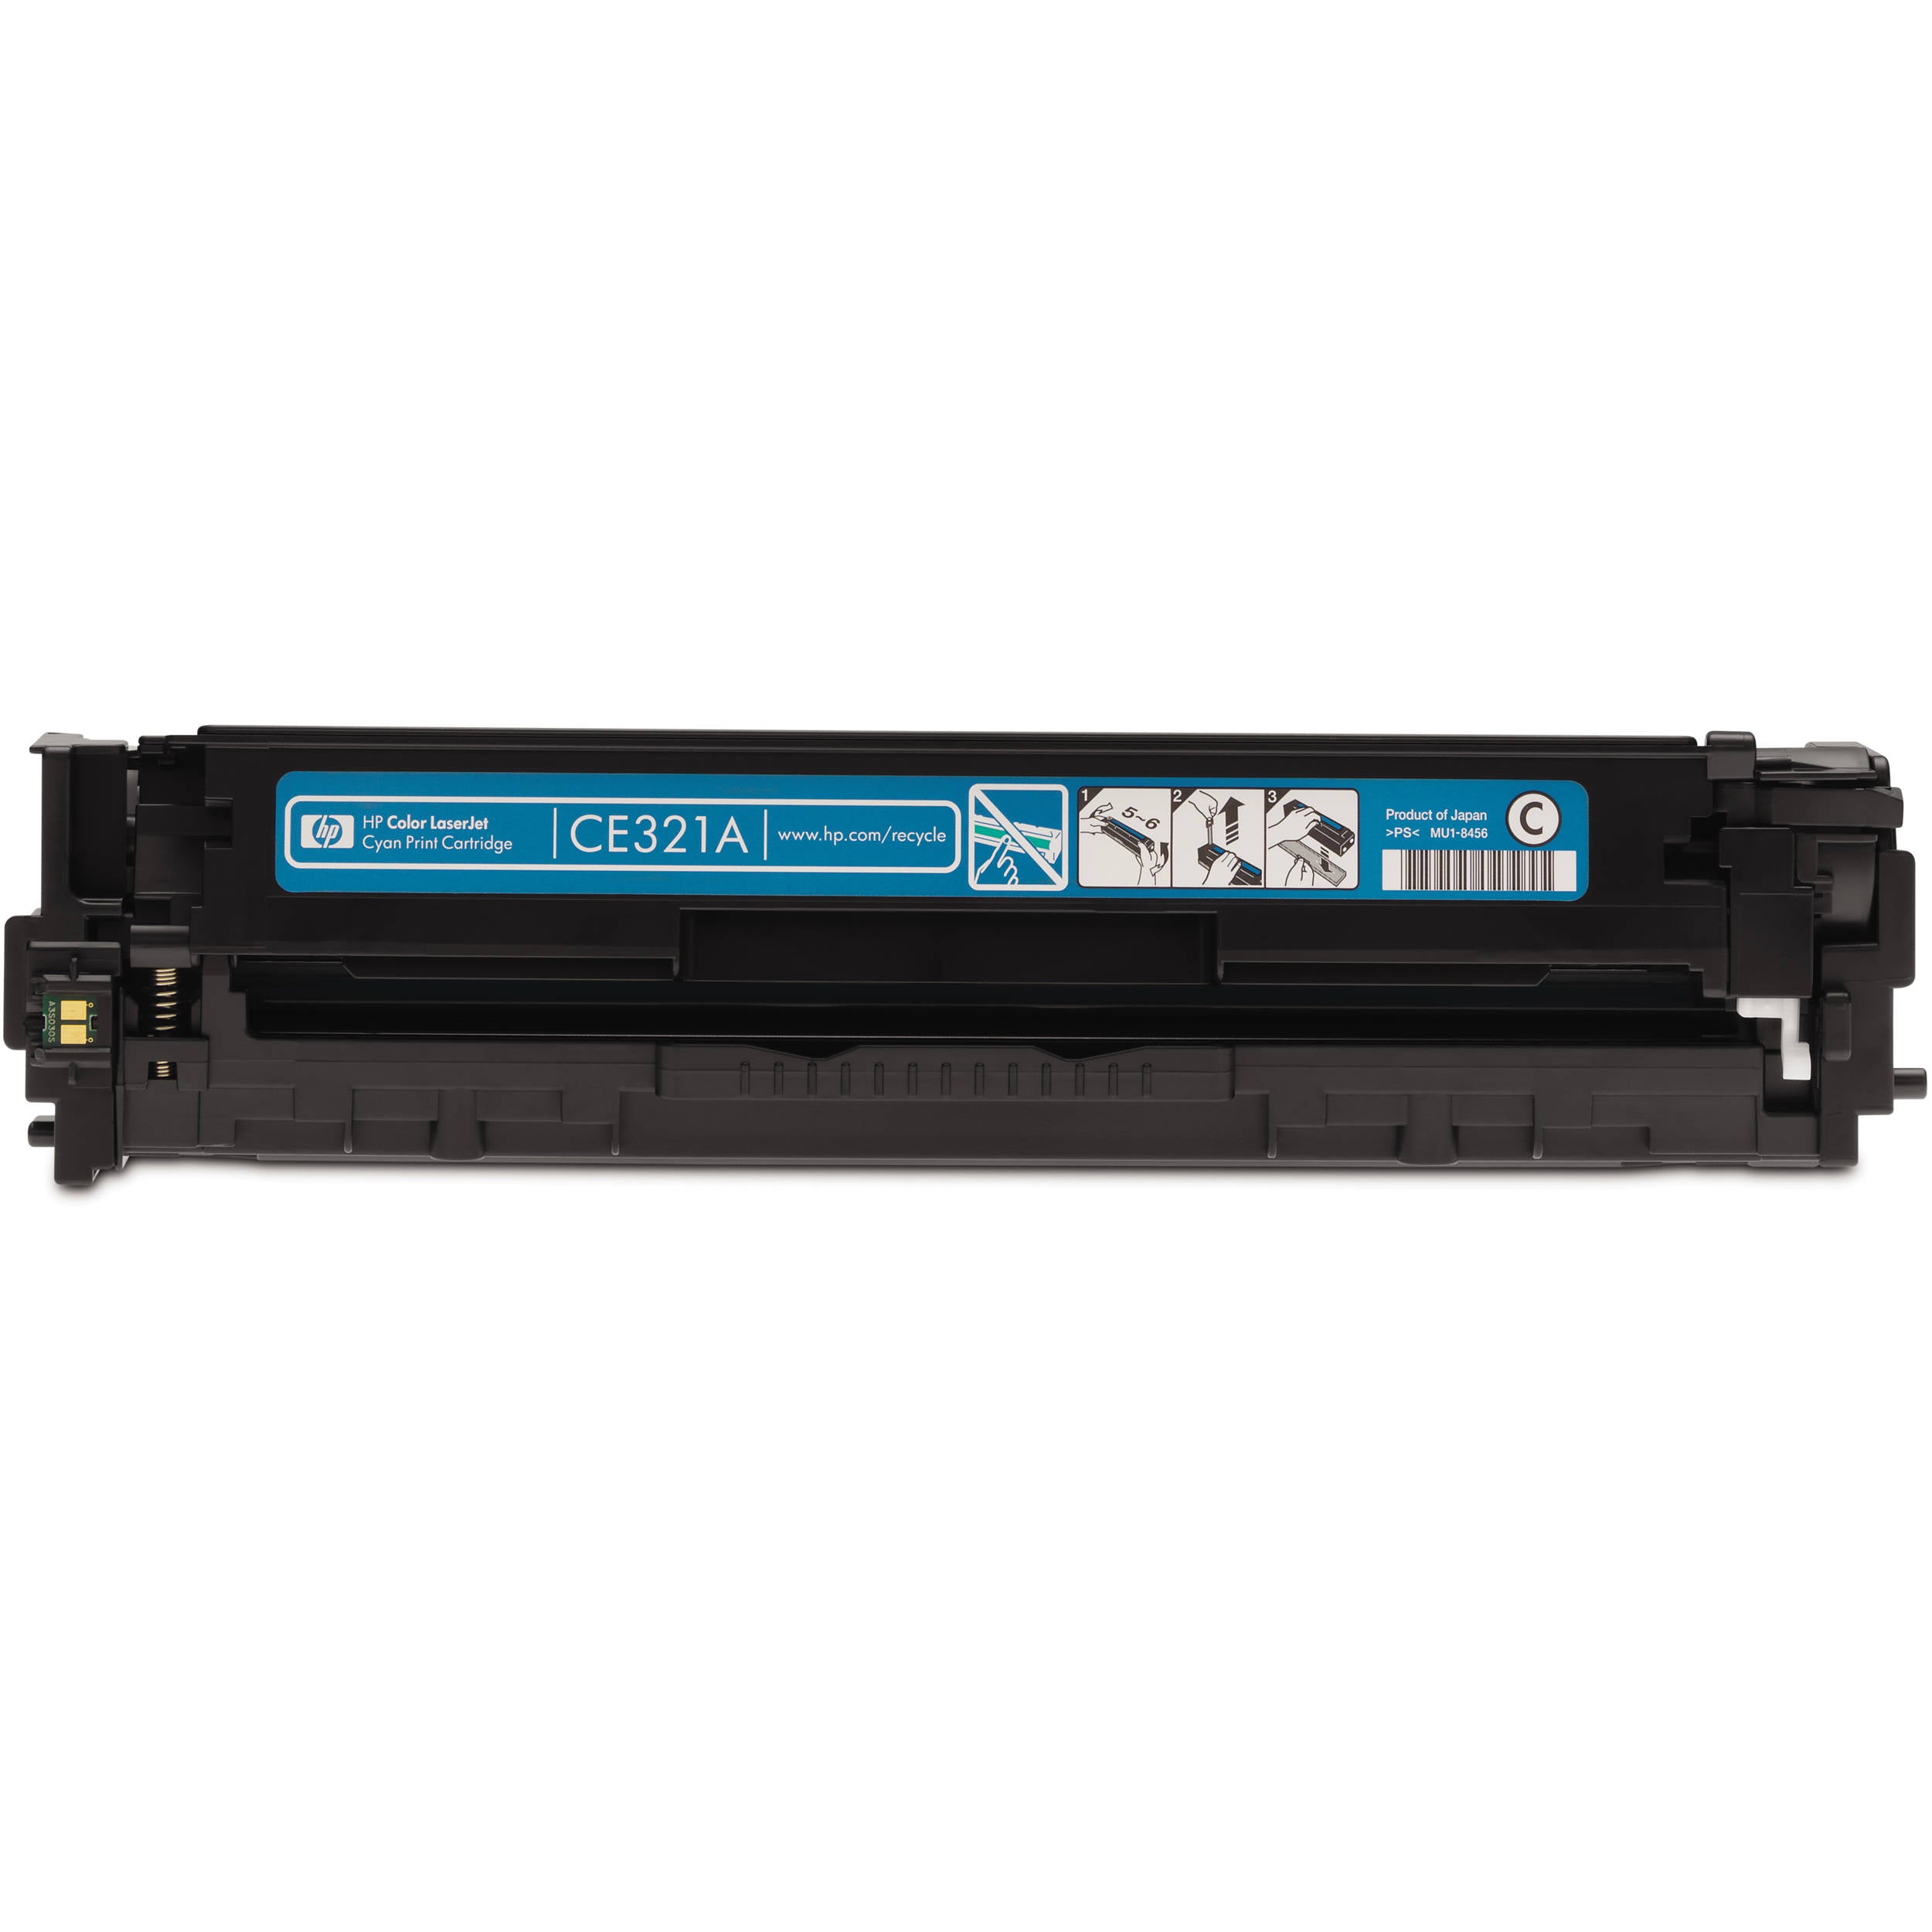 Absolute Toner TONER TO REPLACE HP 128A (CE321A) Cyan Cartridge MADE BY LEXMARK Elevate Original Lexmark Cartridges